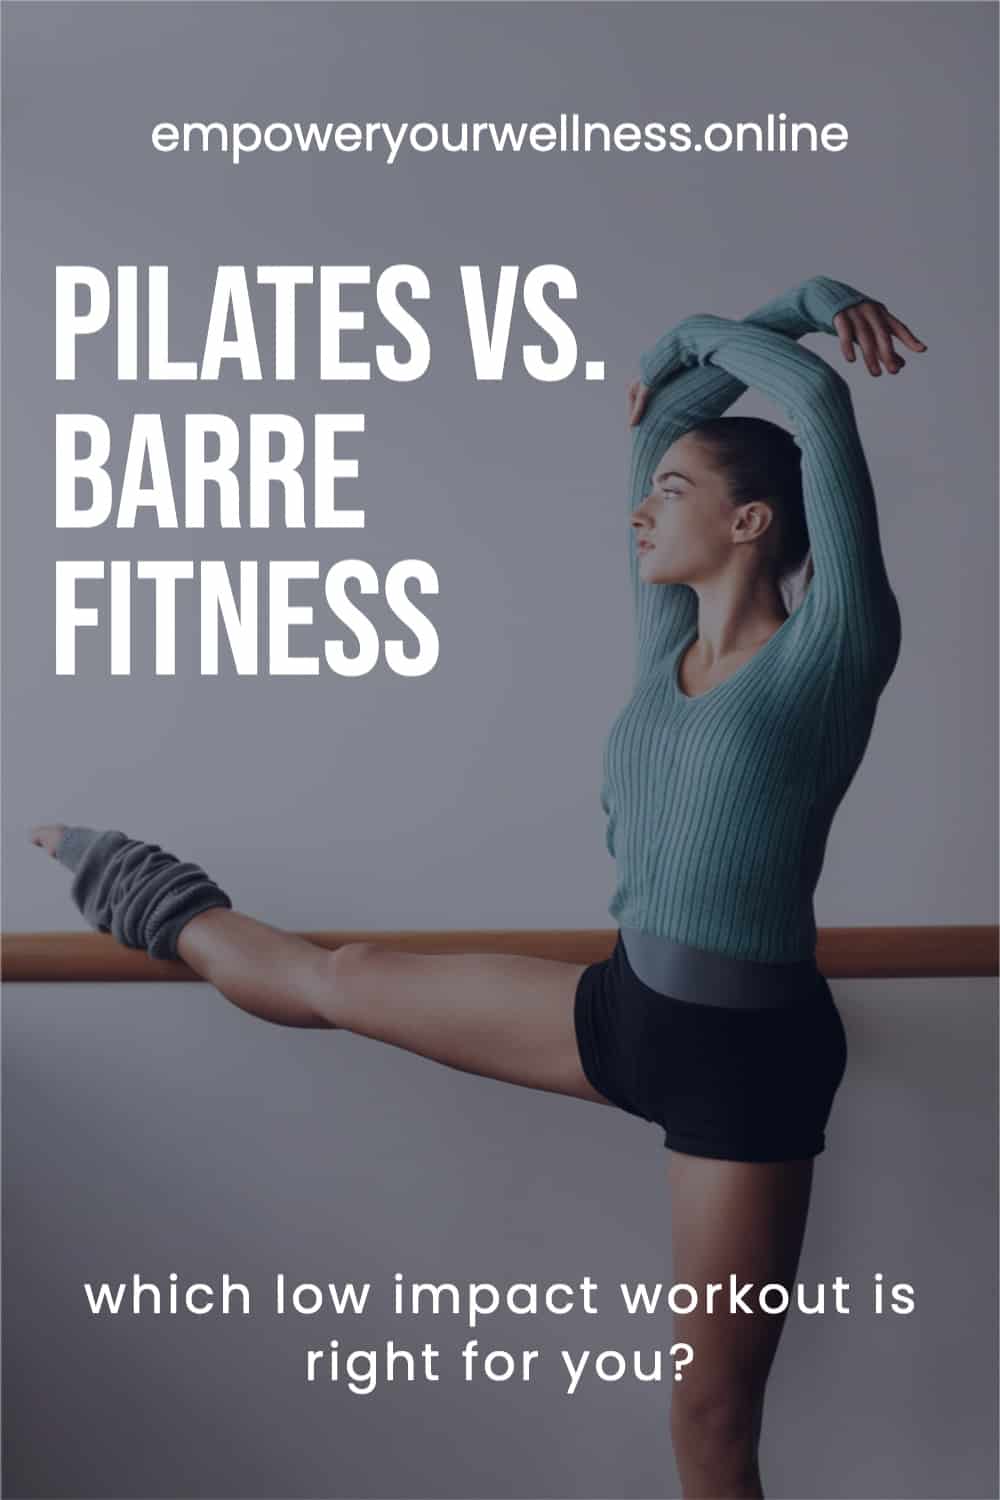 Is Pilates or barre better for glutes?